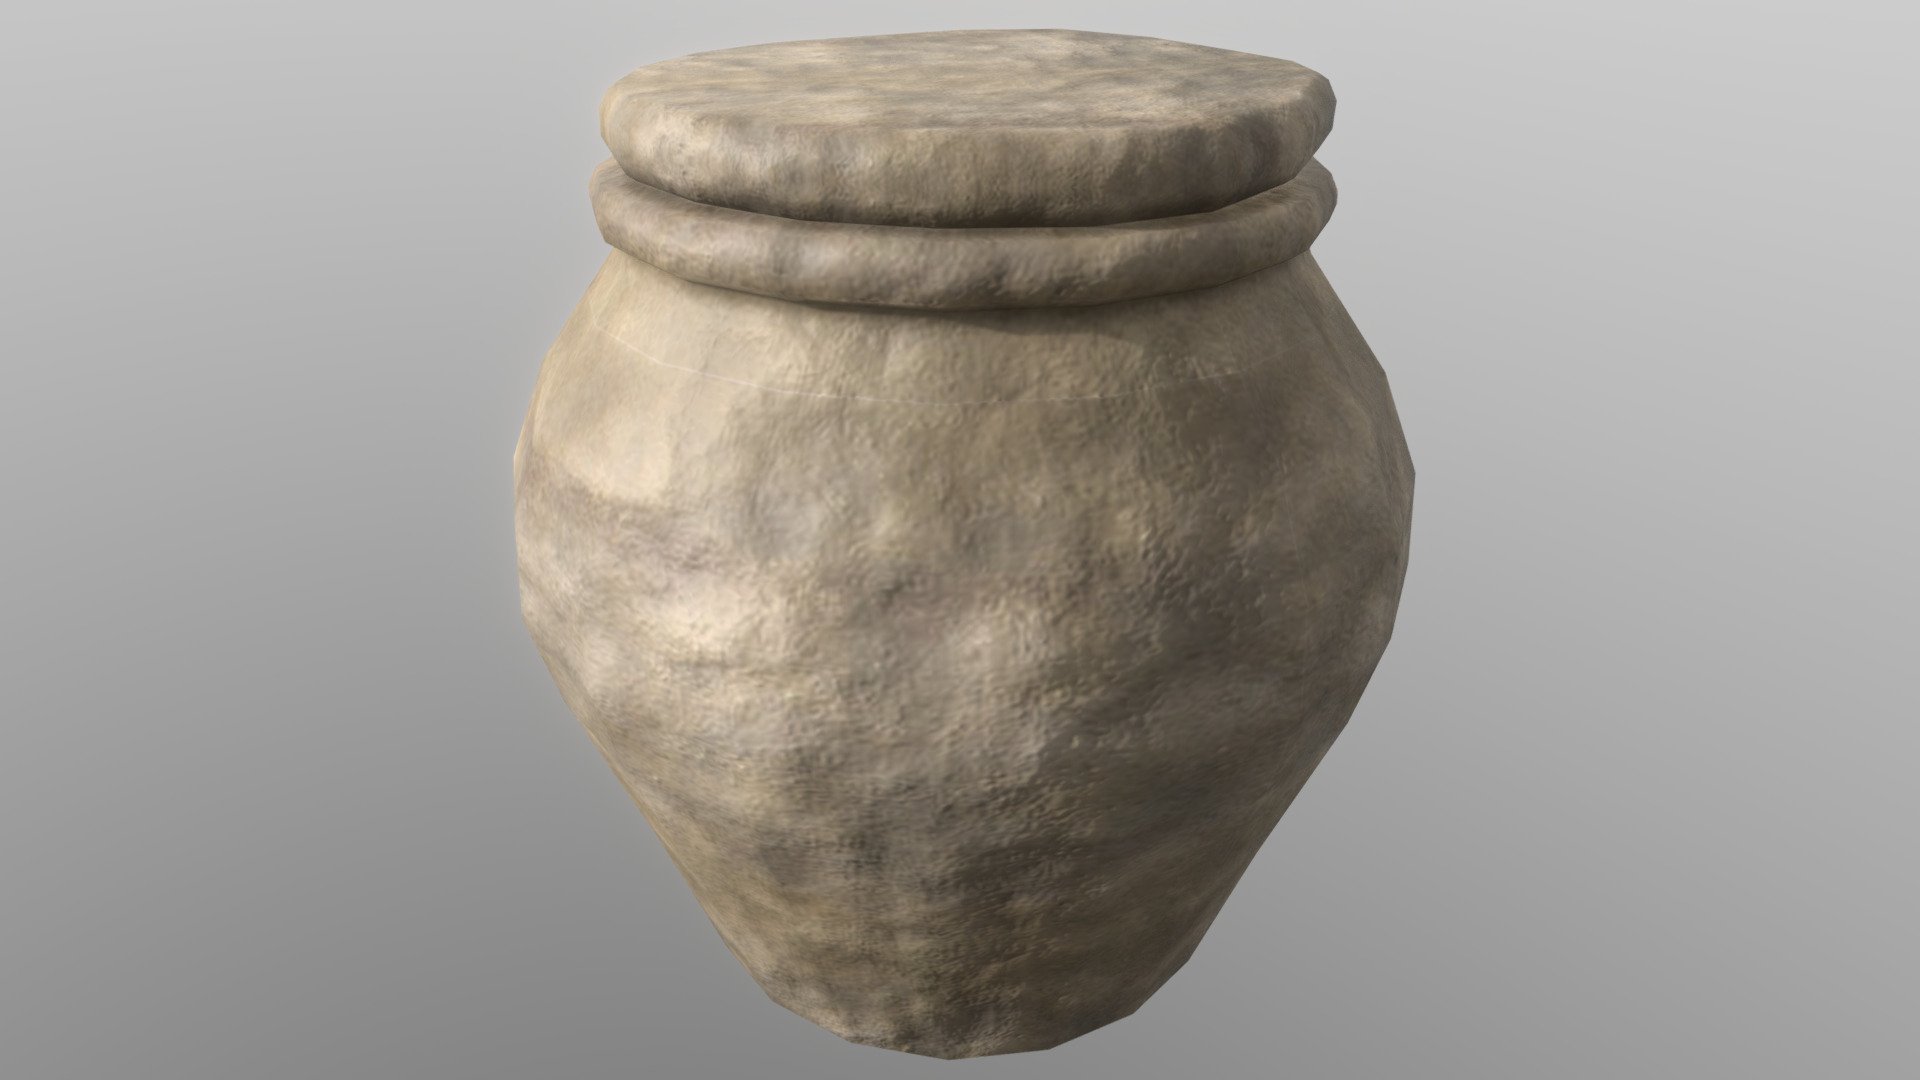 Clay Pot 2 (Viking)
Bring your 3D model of a clay pot to life with this  low-poly design. Perfect for use in games, animations, VR, AR, and more, this model is optimized for performance and still retains a high level of detail.


Features



low poly design with 525 vertices

1,071 edges

550 faces (polygons)

1,042 tris

2k PBR Textures and materials

File formats included: .obj, .fbx, .dae


Tools Used
This Clay Pot 3D model was created using Blender 3.3.1, a popular and versatile 3D creation software.


Availability
This low-poly Clay Pot 3D model is ready for use and available for purchase. Bring your project to the next level with this high-quality and optimized model 3d model